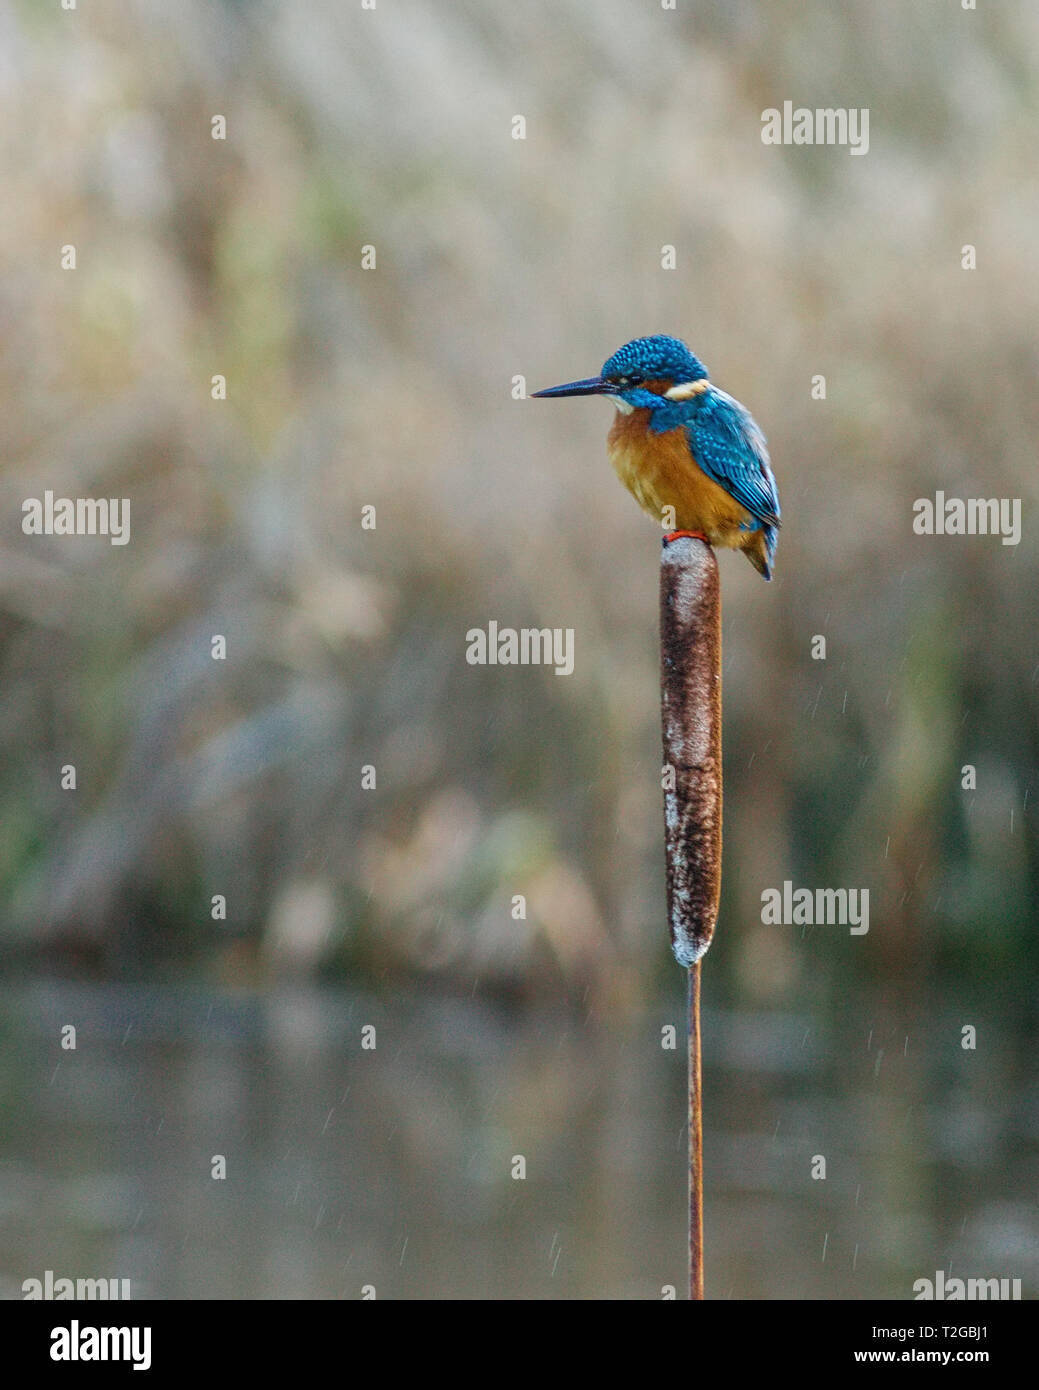 KINGFISHER BIRD PERCHED ON A BULRUSH Stock Photo